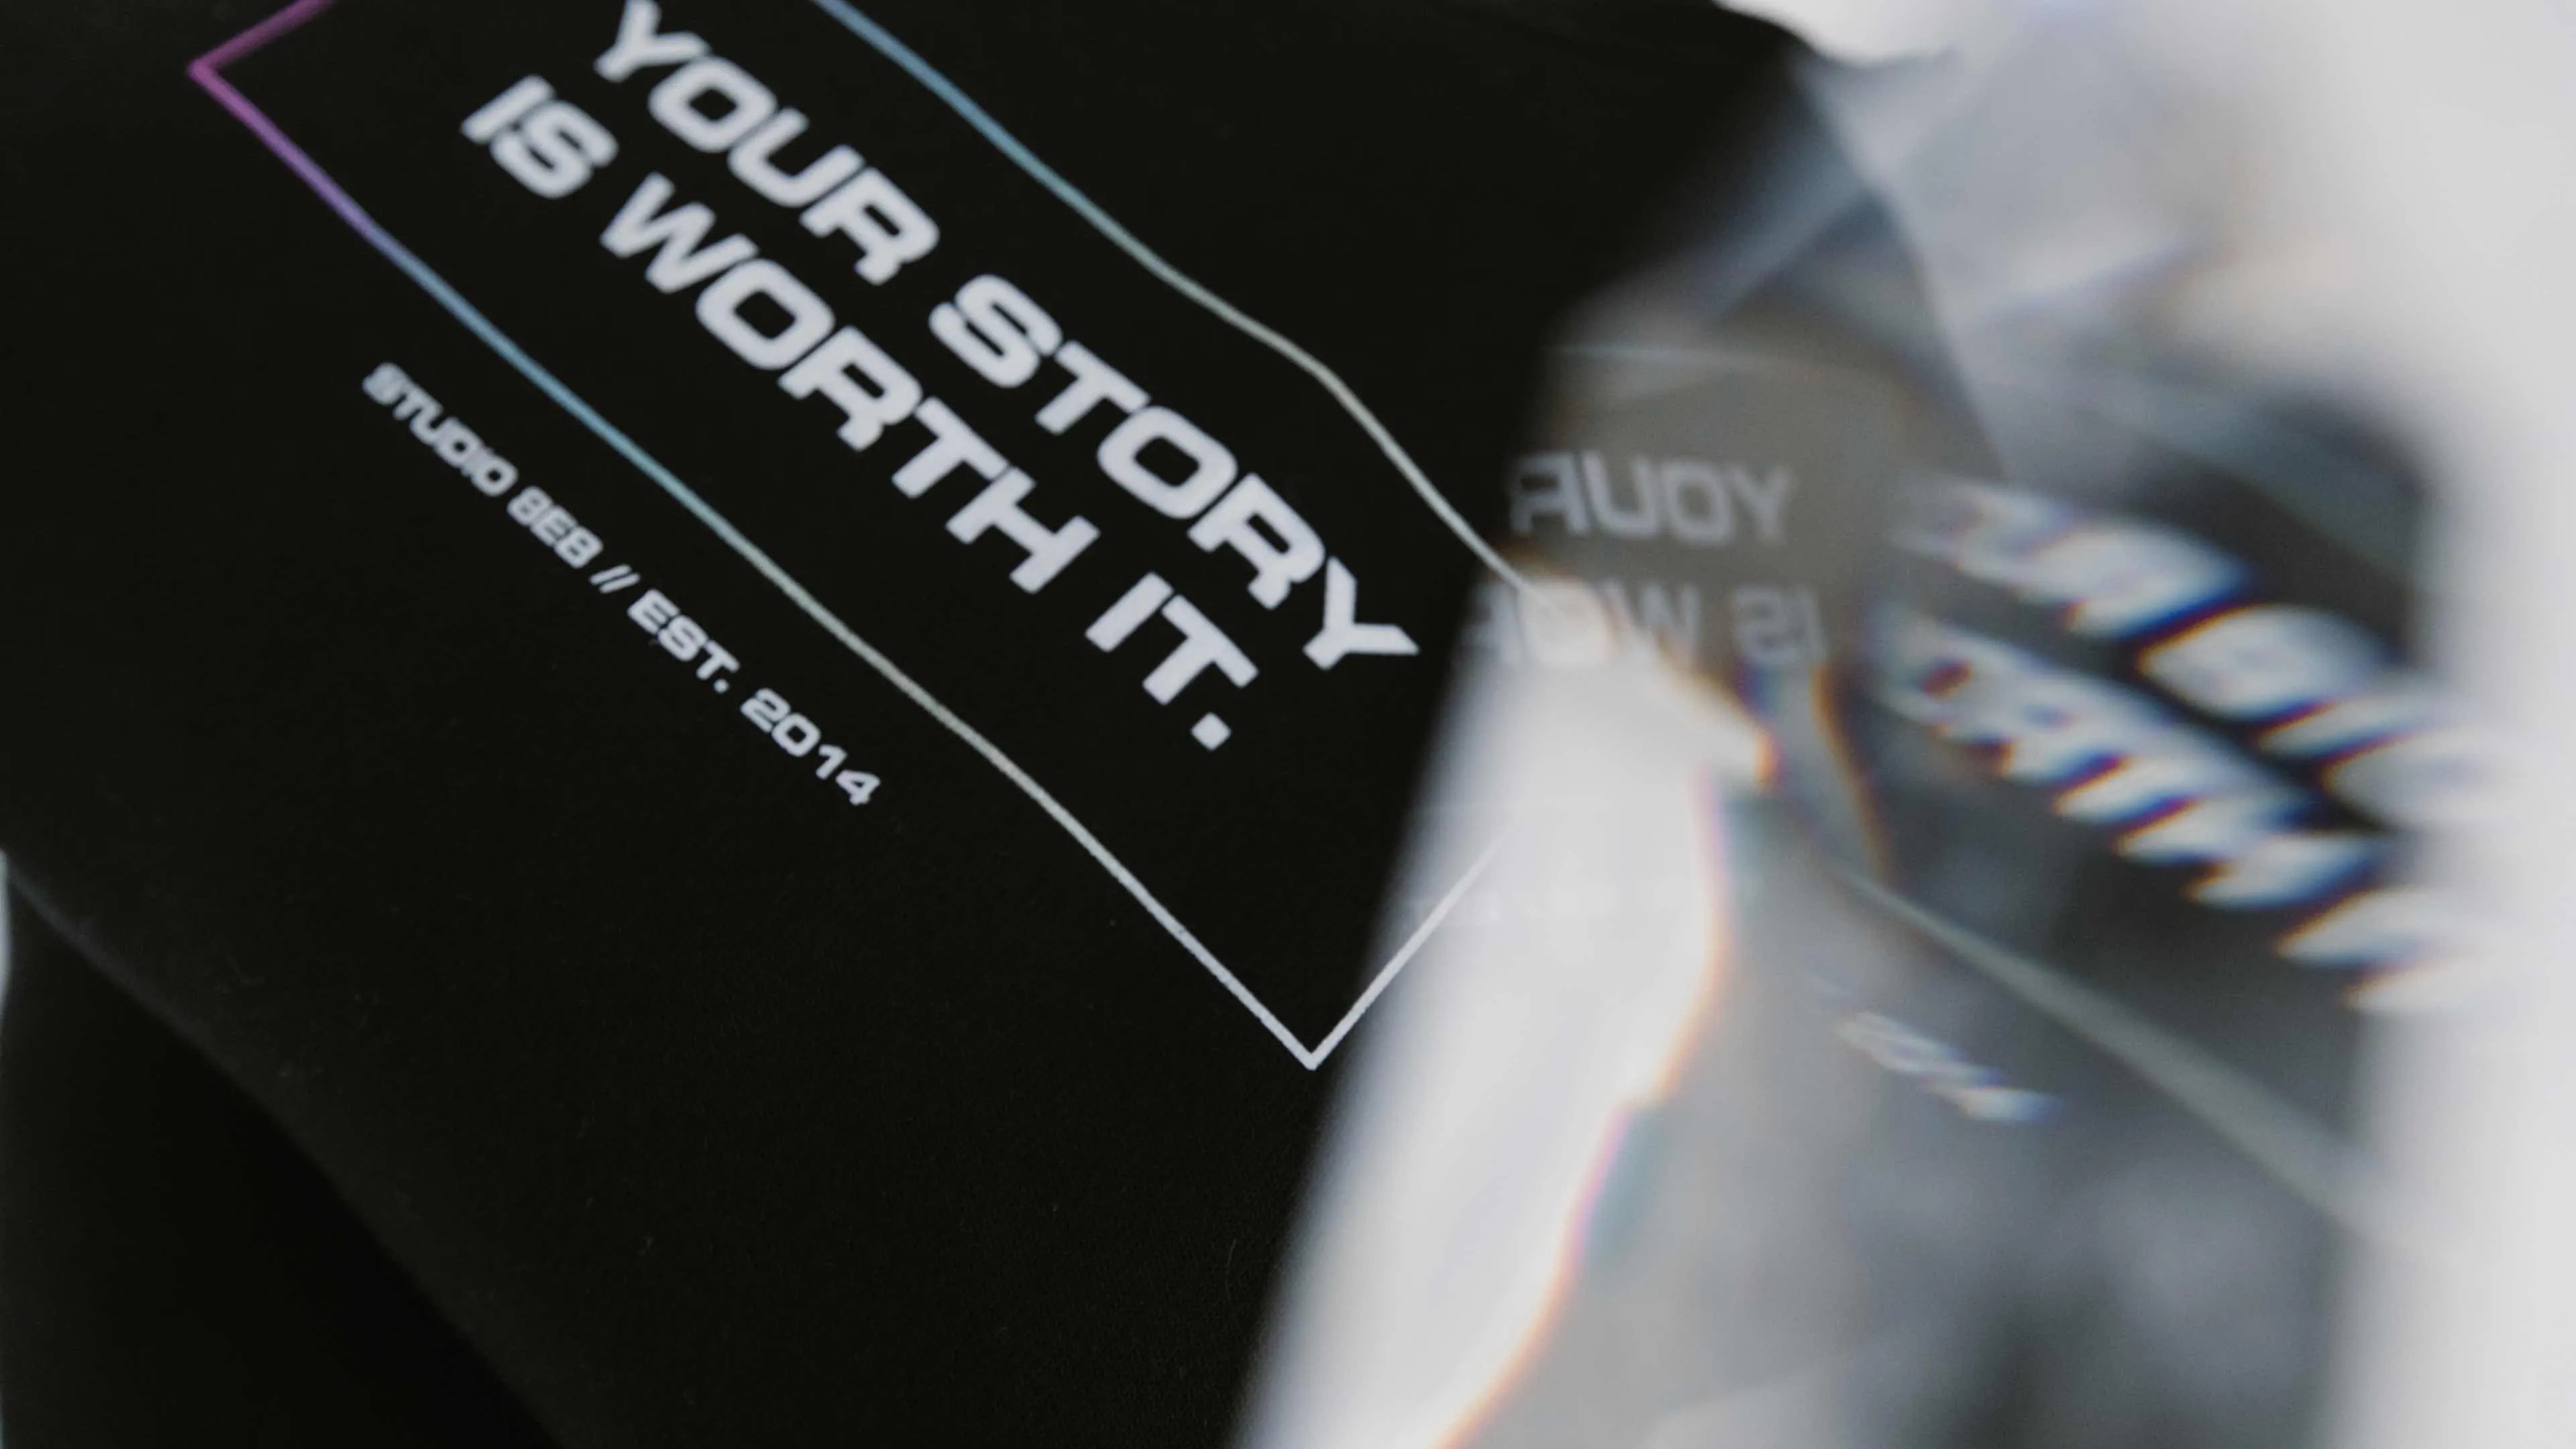 Close-up photo of our "your story is worth it" crewneck sweatshirt